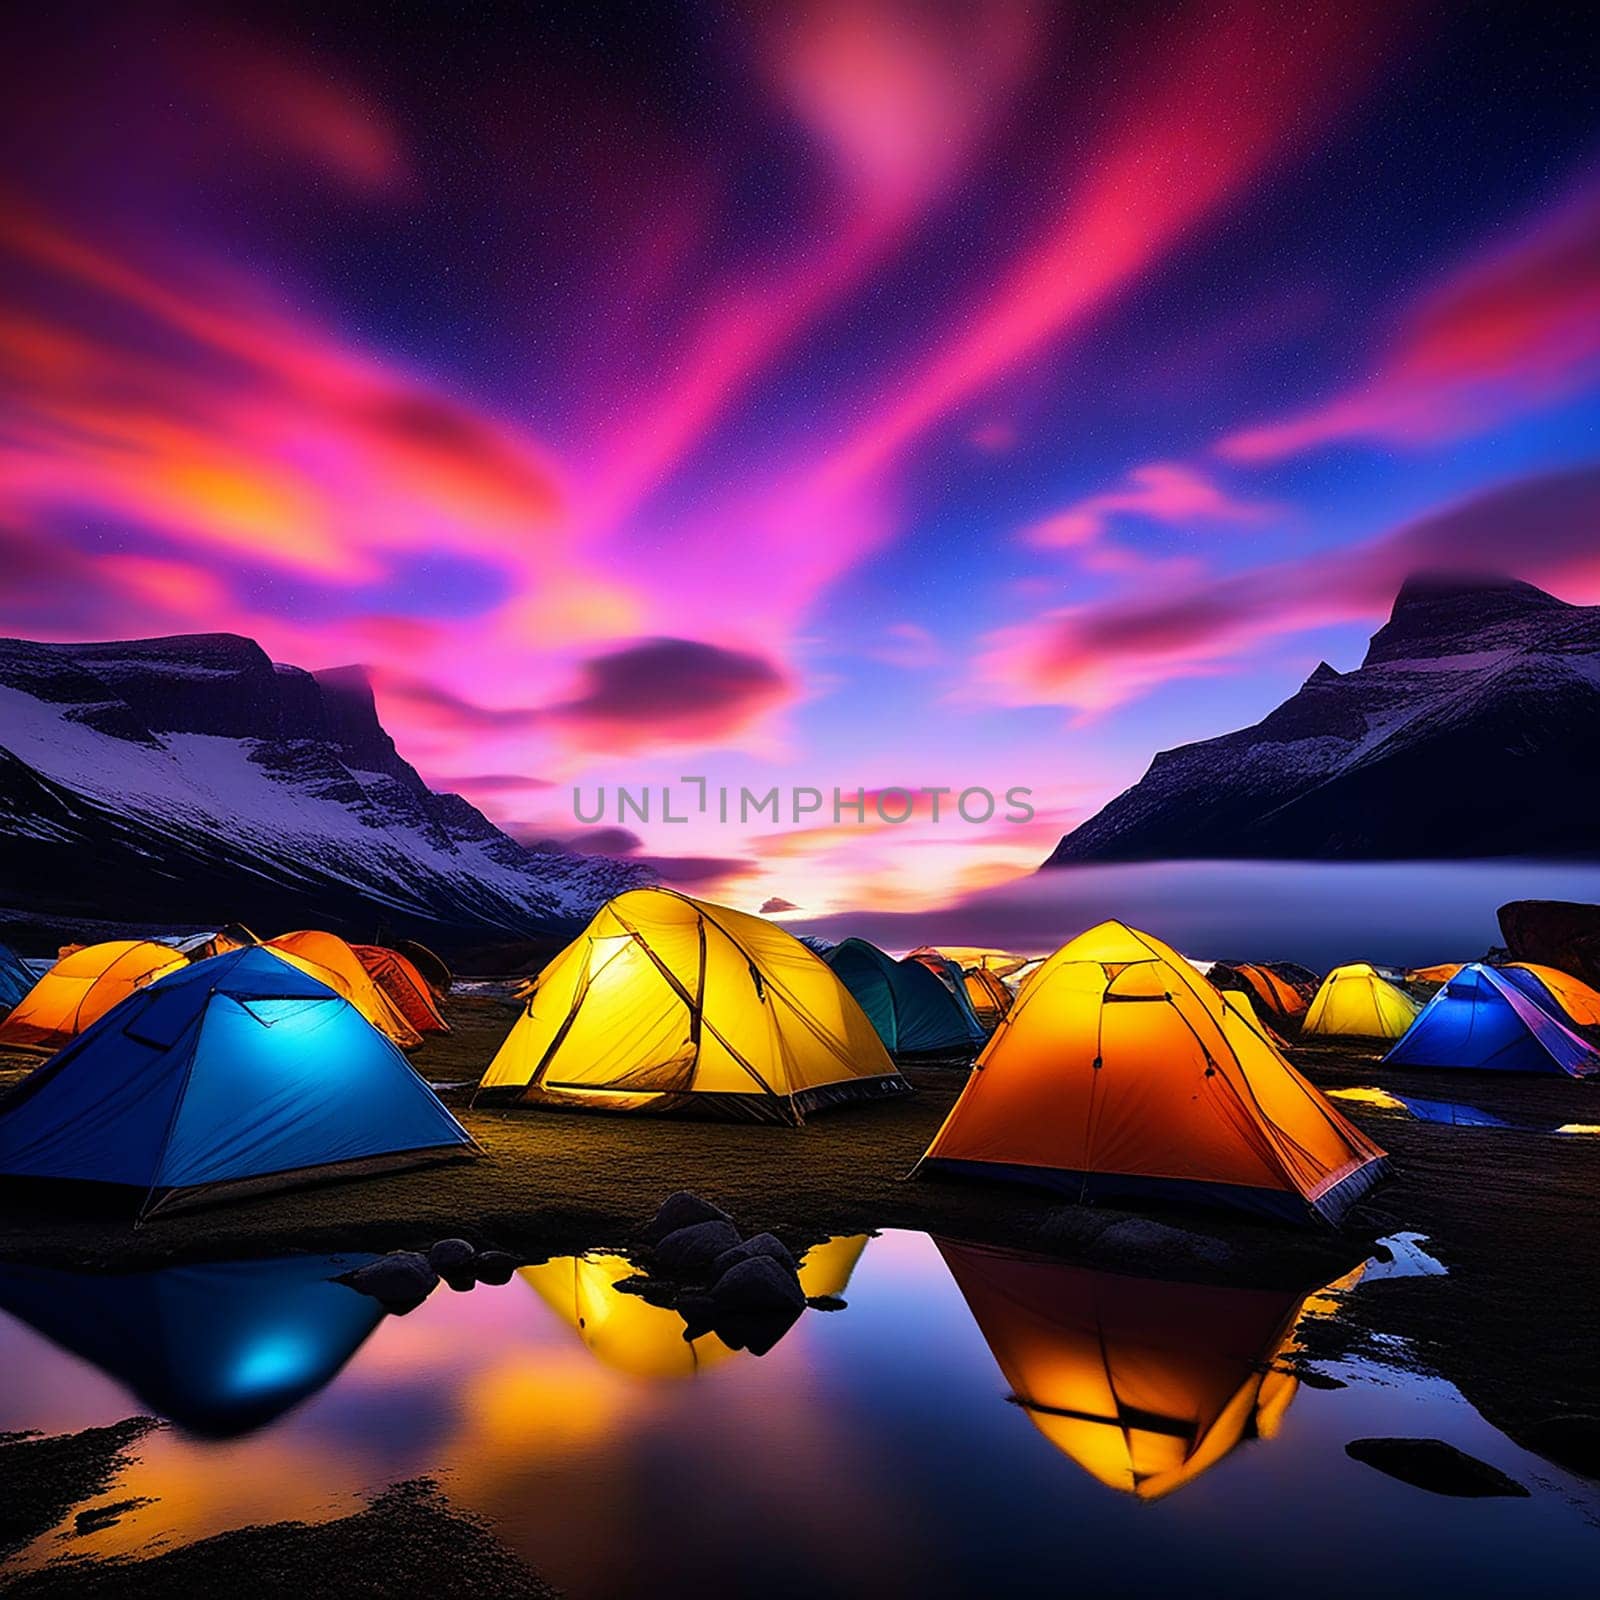 Under the Northern Lights: Tent Camping and Aurora Experience" by Petrichor